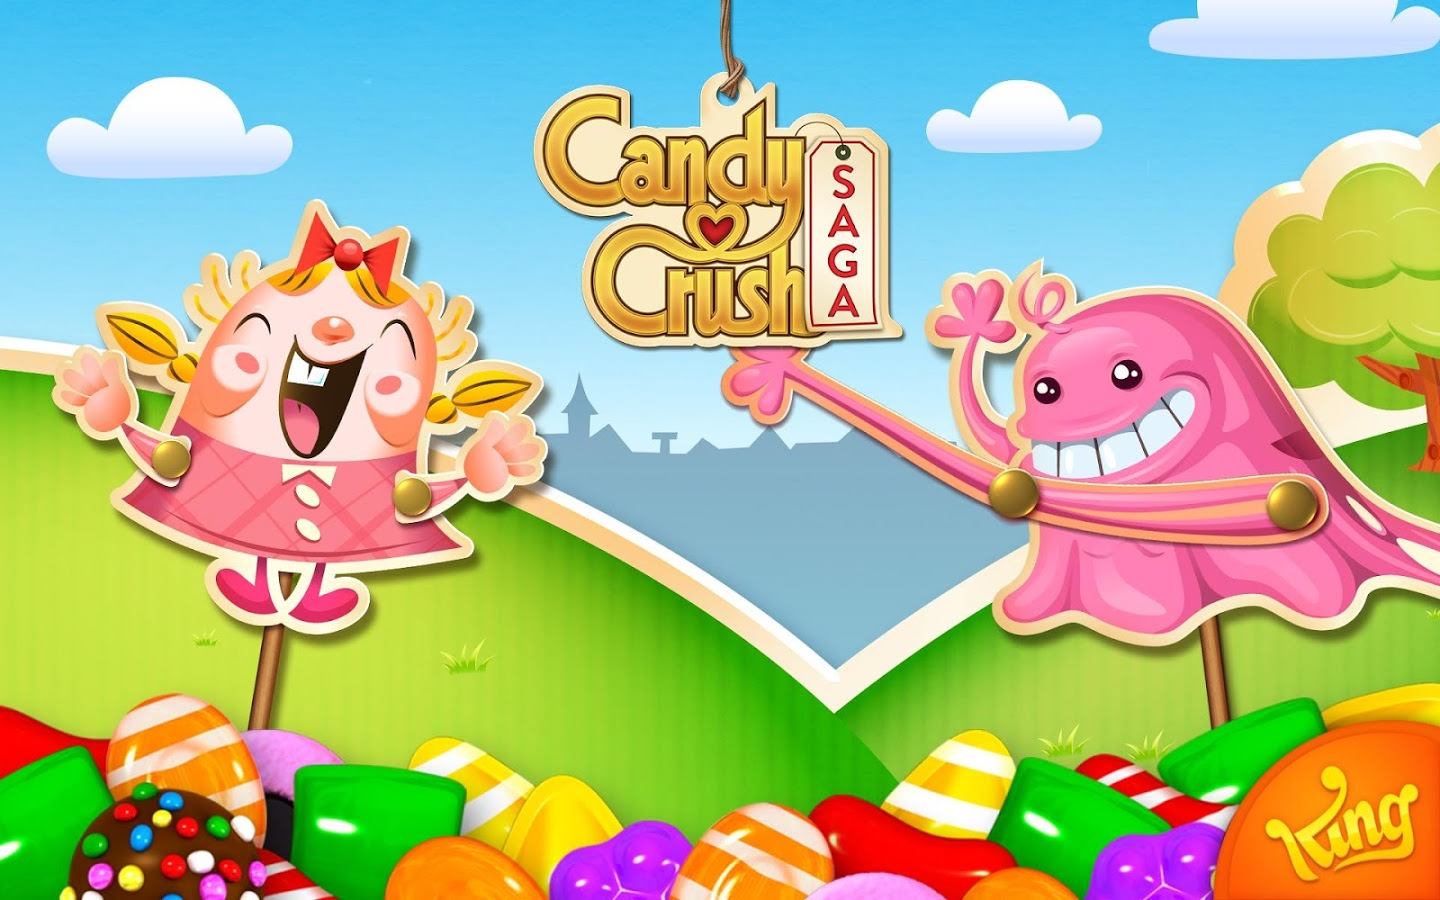 CBS is turning “Candy Crush” into a game show | TechCrunch